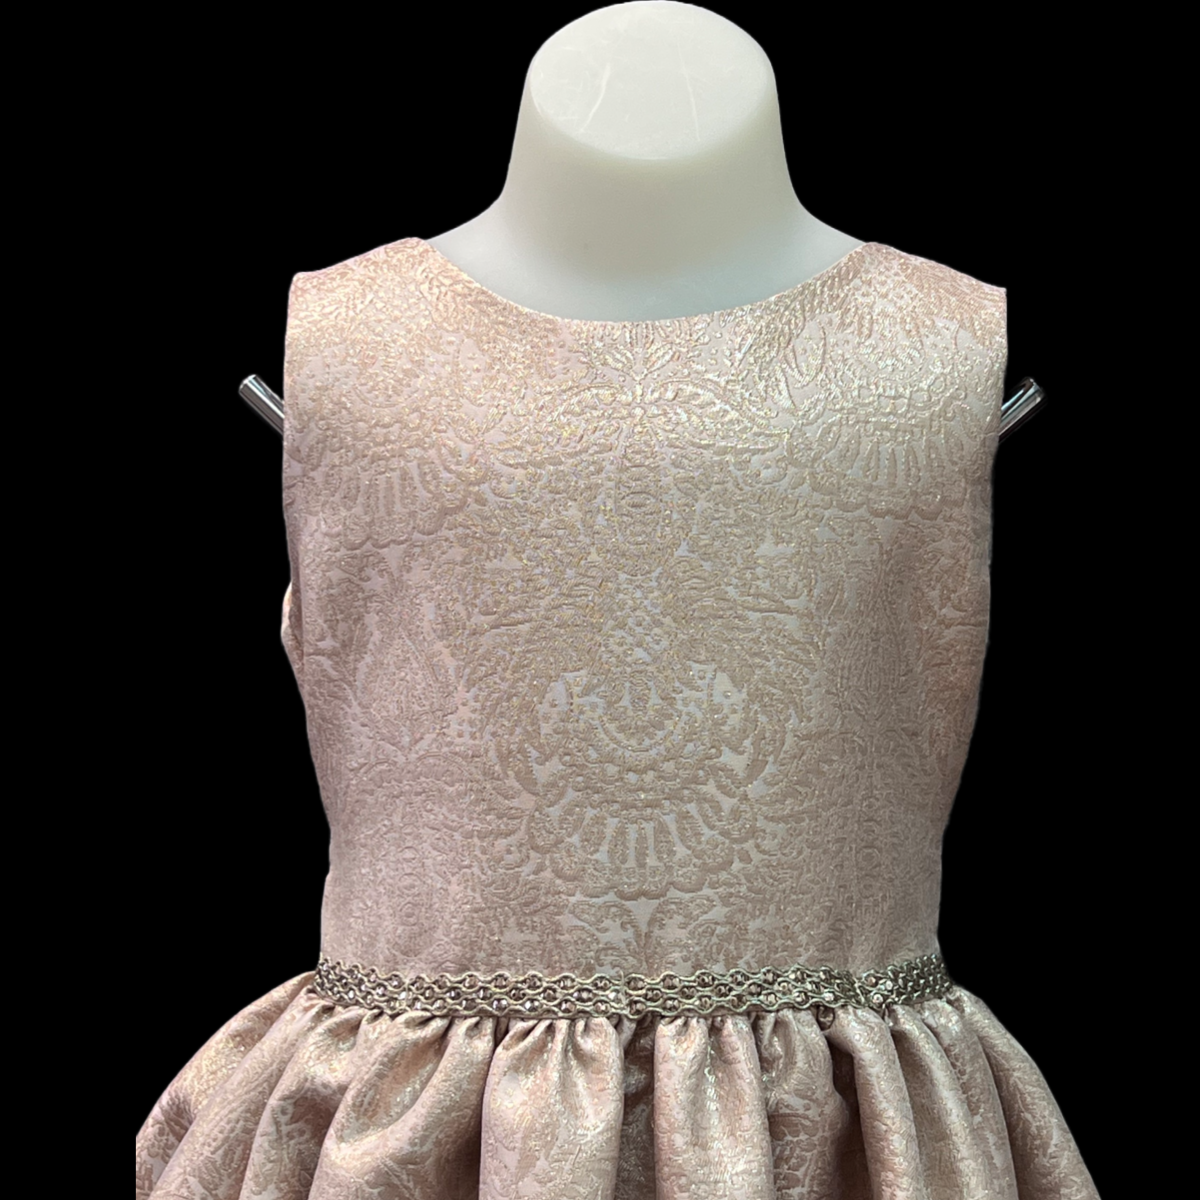 Sleeveless Rose Gold Embroidered Dress